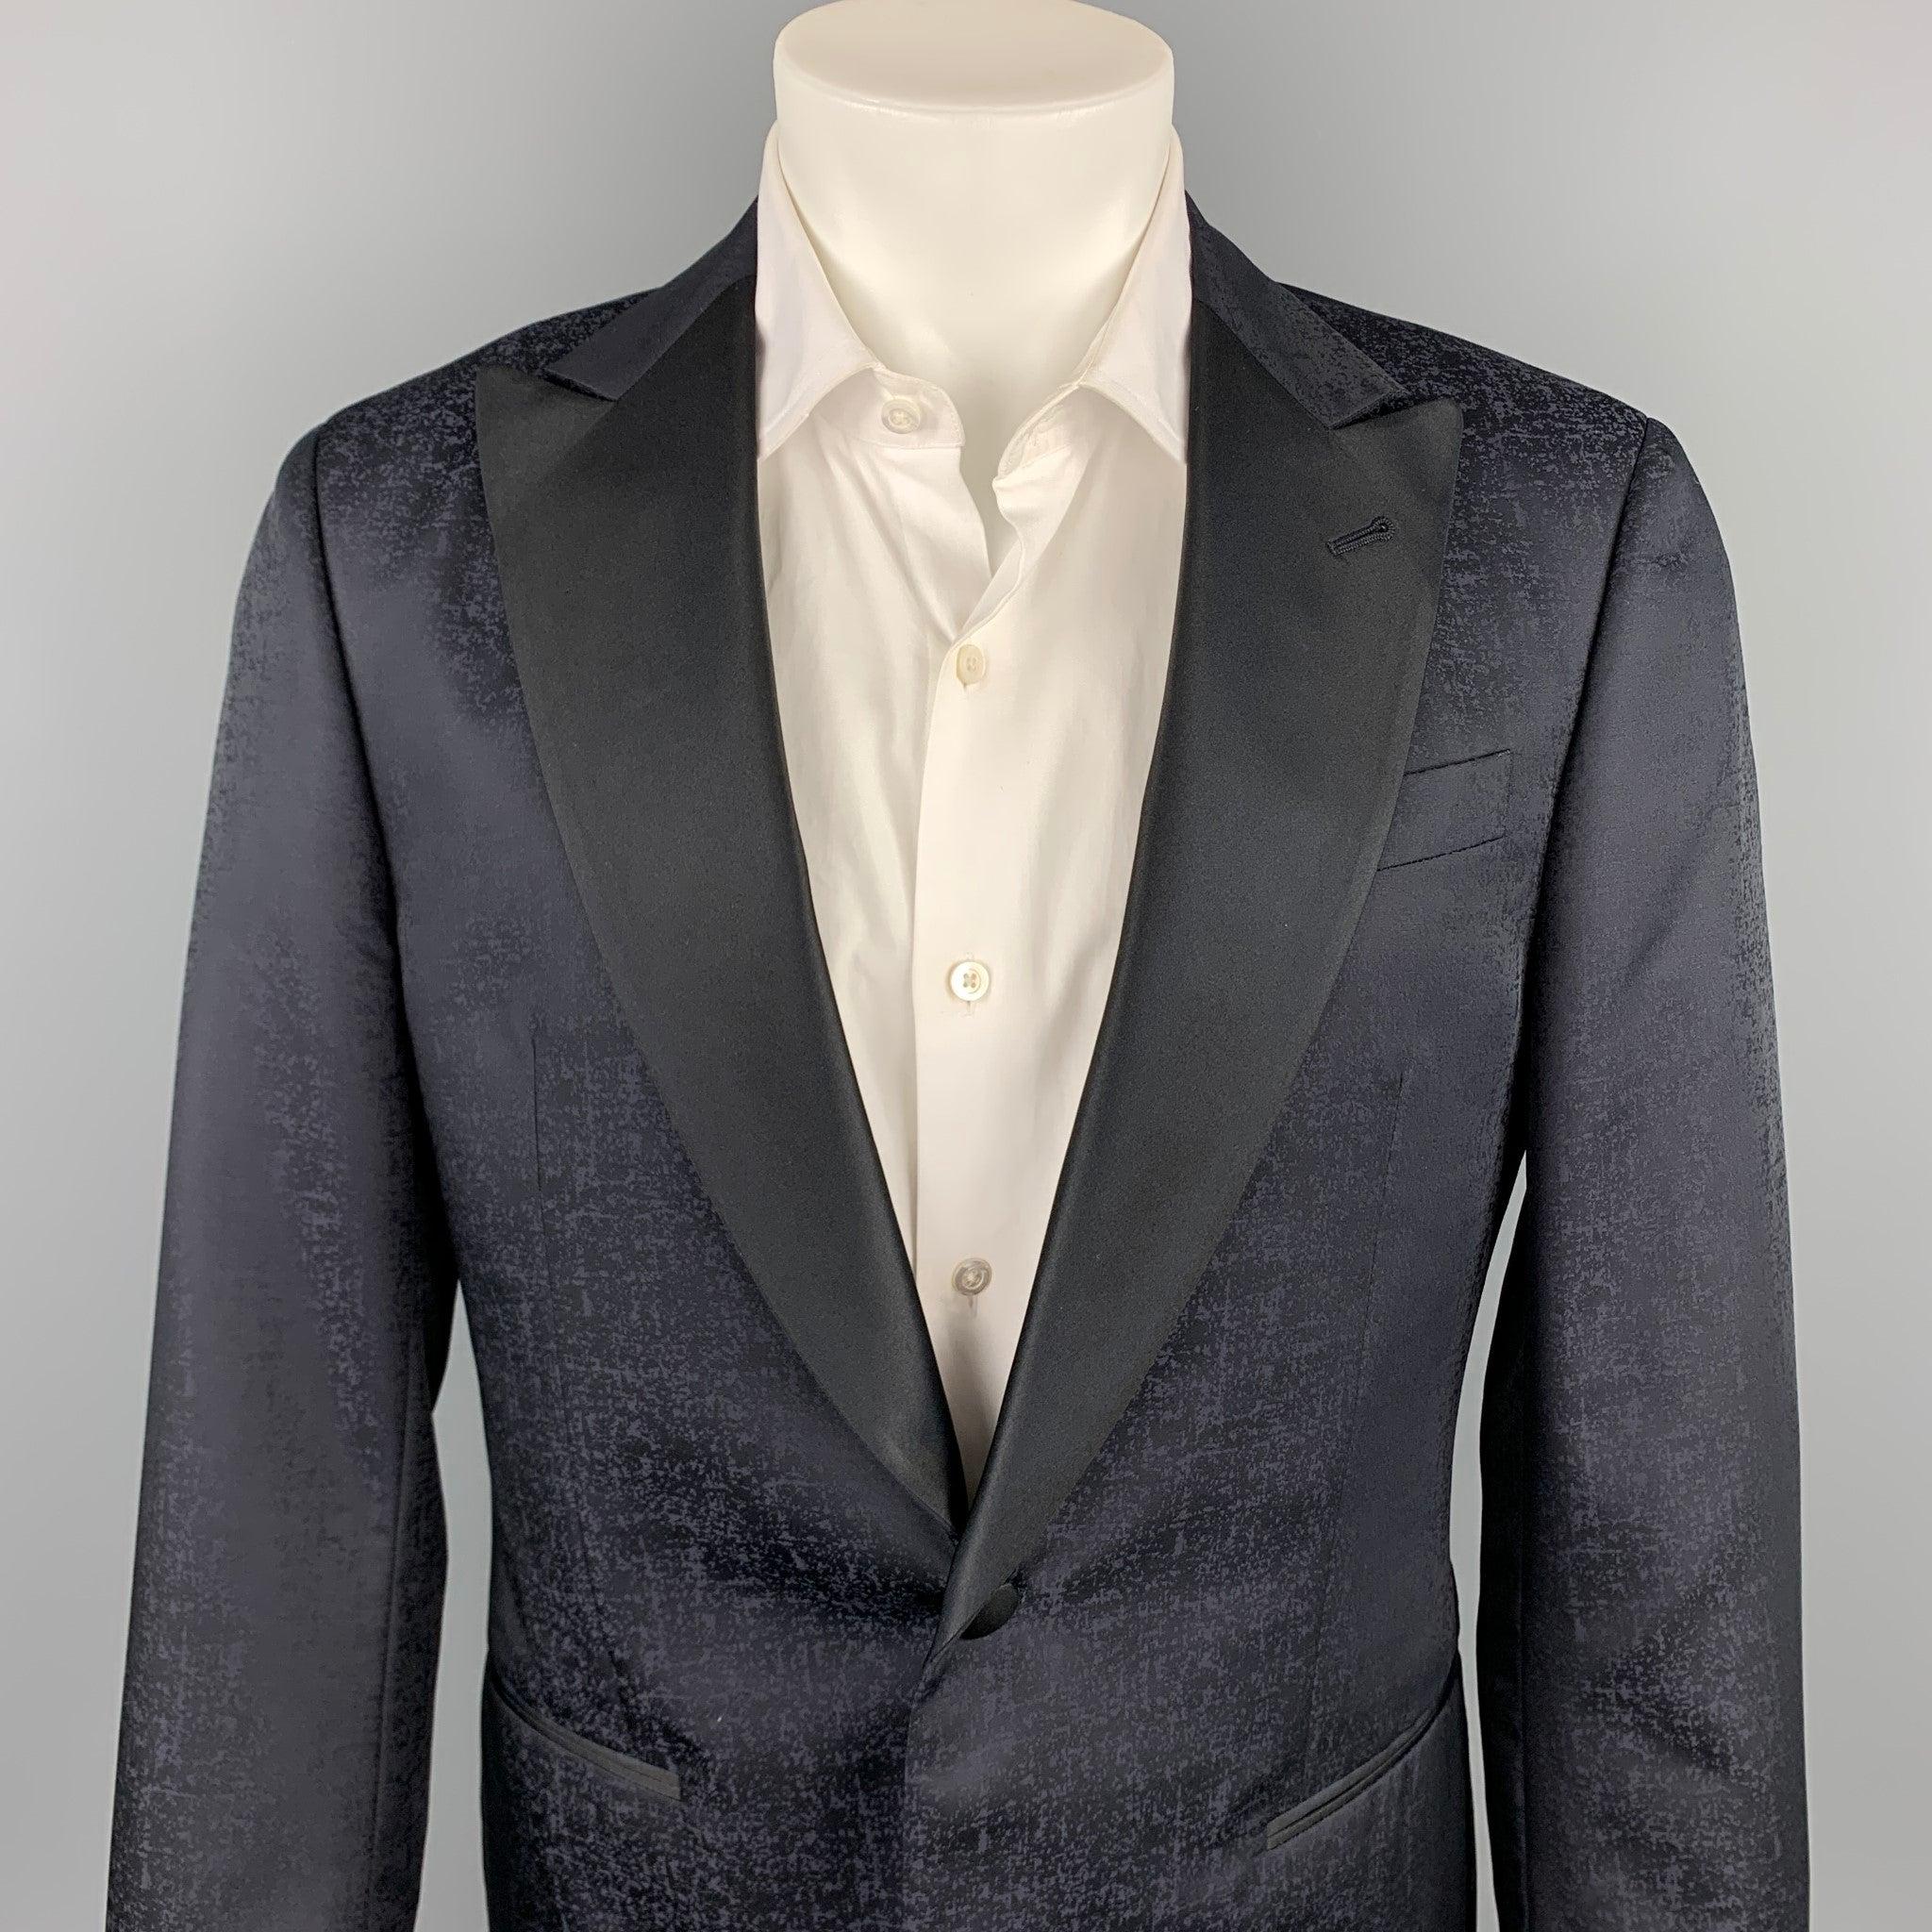 GIORGIO ARMANI sport coat comes in a black marbled wool / silk with a full liner featuring a peak lapel, slit pockets, and a single button closure. Made in Italy.
Very Good
Pre-Owned Condition. 

Marked:   IT 48 R  

Measurements: 
 
Shoulder: 18